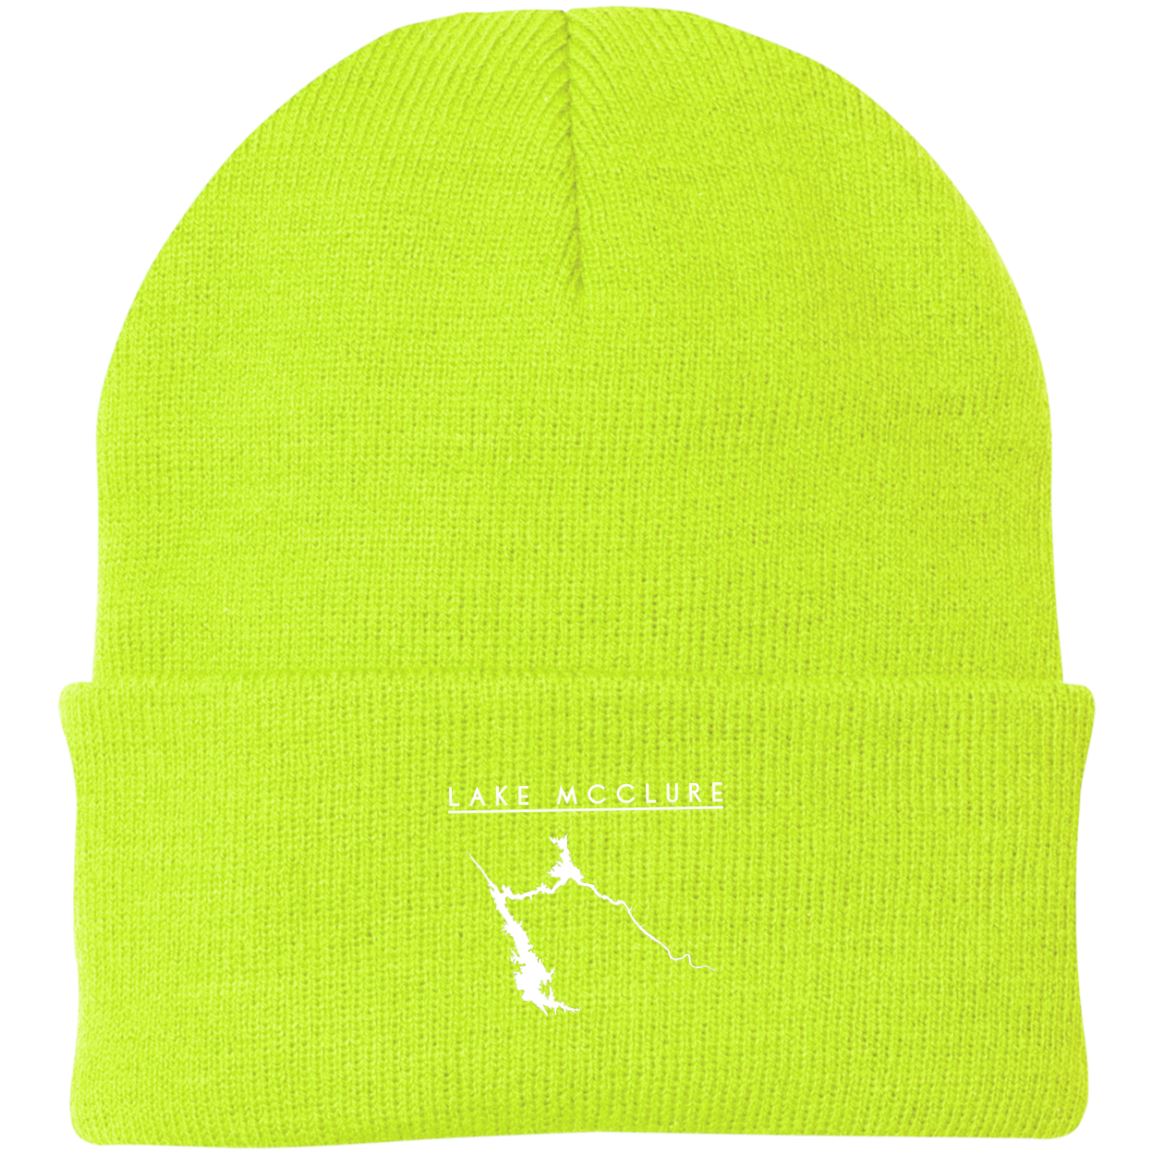 Lake McClure Embroidered Knit Cap - Houseboat Kings